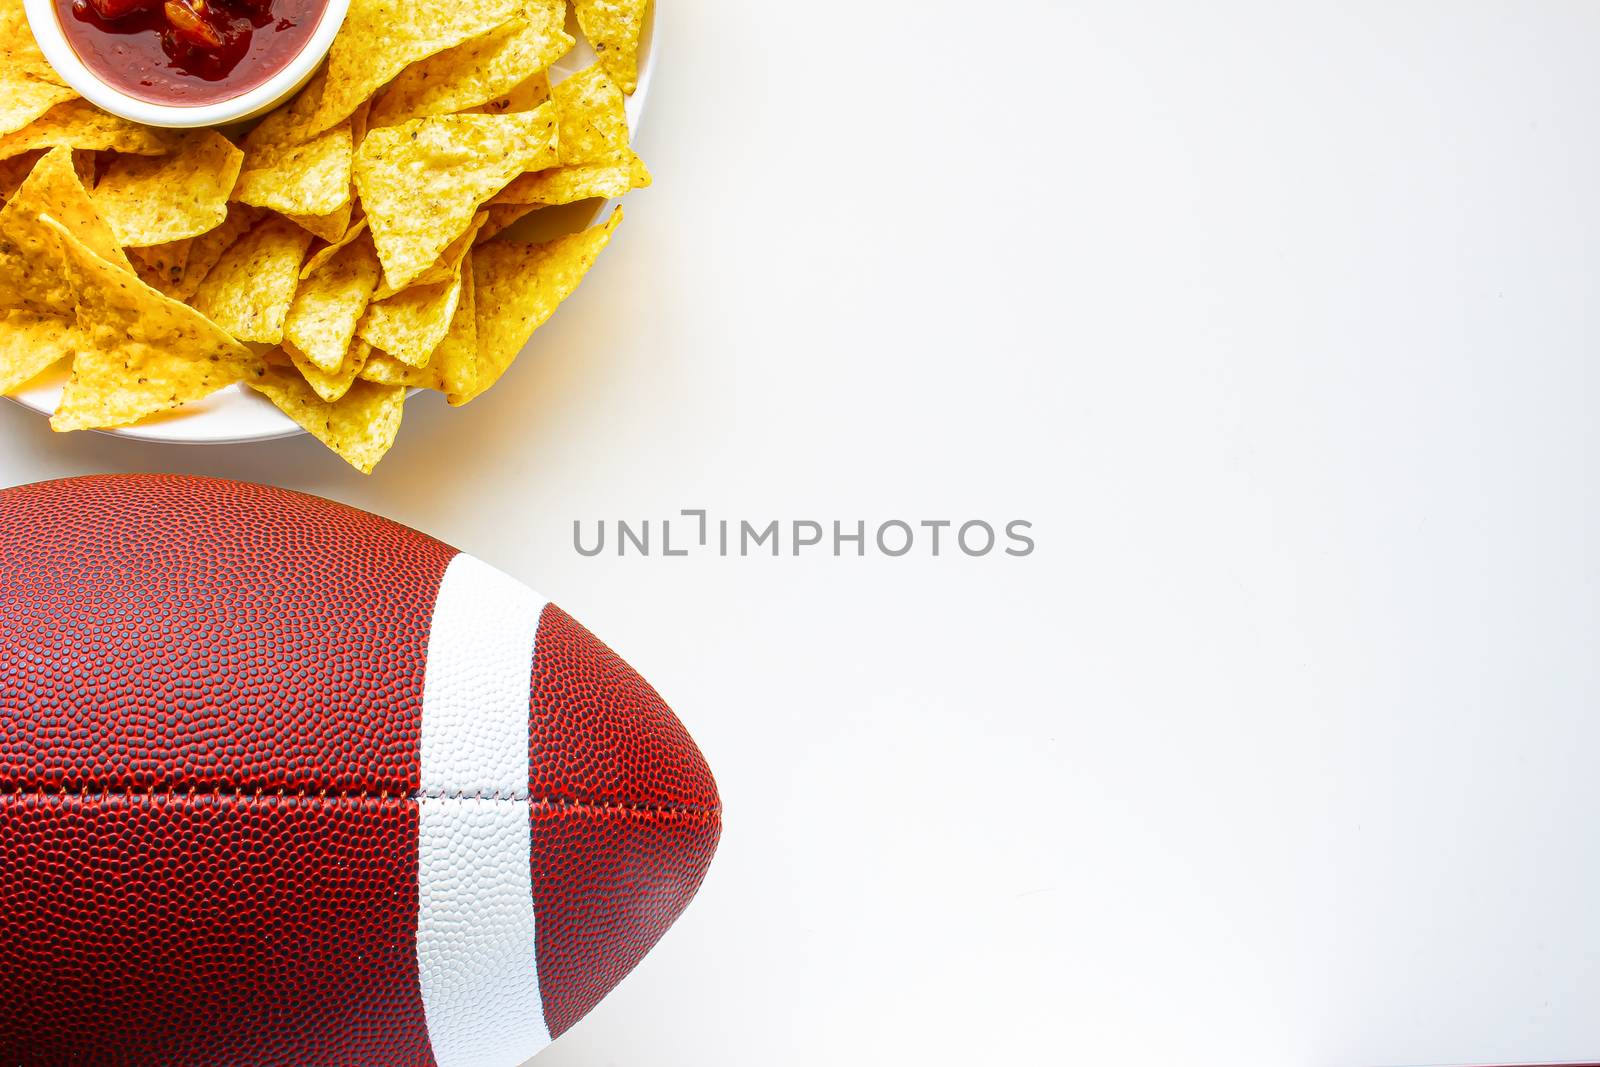 An American football with organic nacho chips and mild salsa on the side on a white background